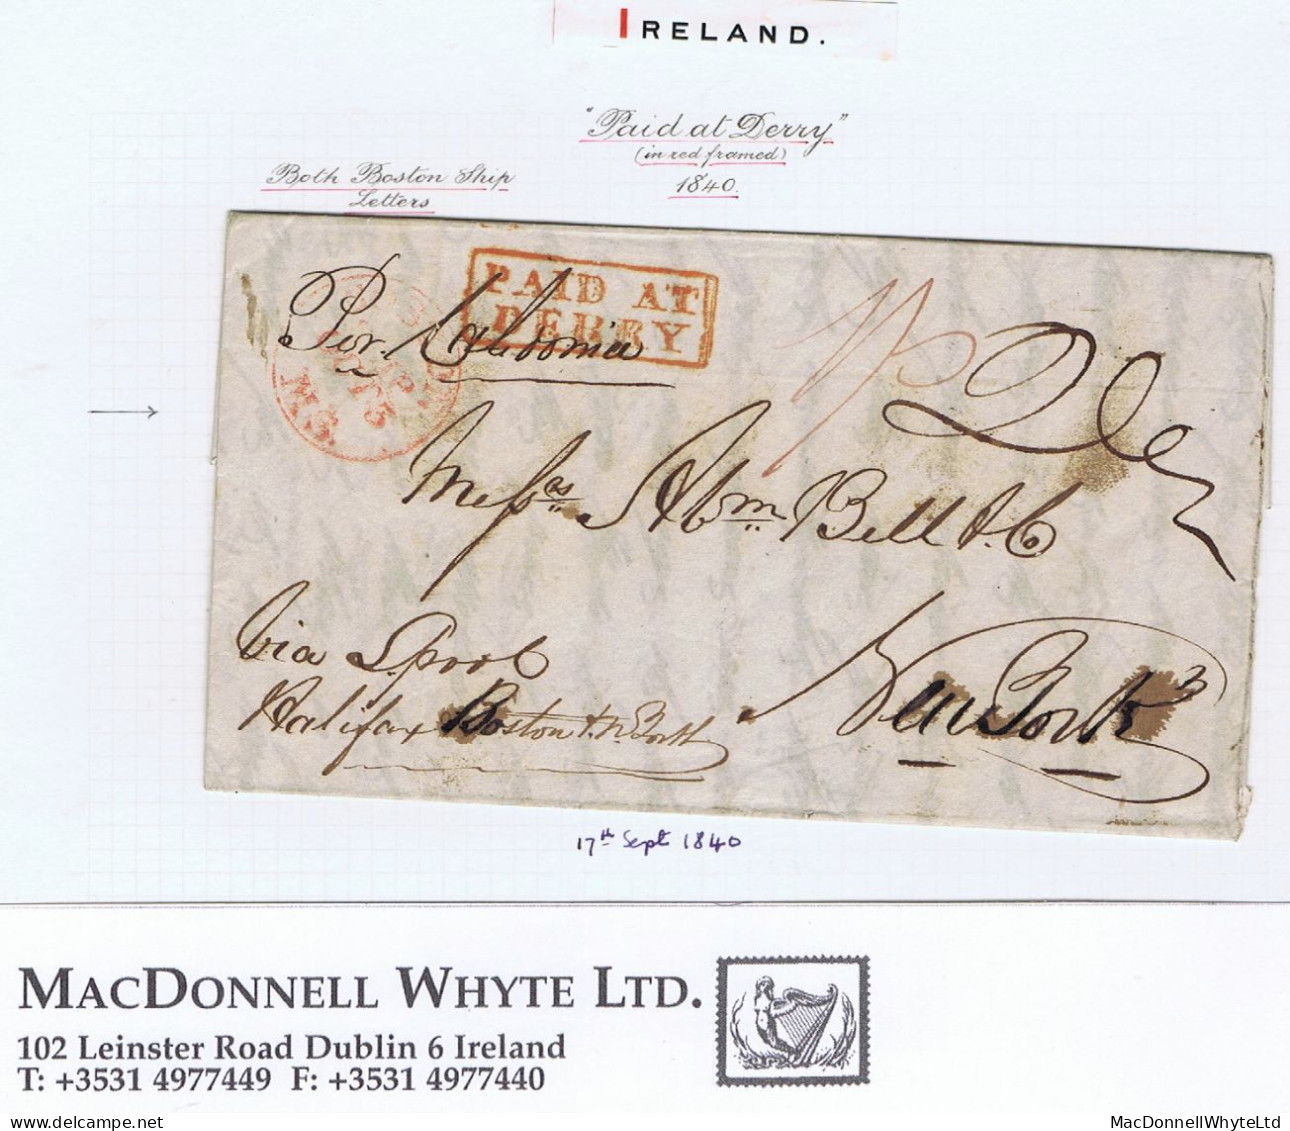 Ireland Derry TransatlanticUS 1840 Letter Londonderry To New York Paid "1/-" With Boxed PAID AT/DERRY In Red BOSTON/SHIP - Prefilatelia